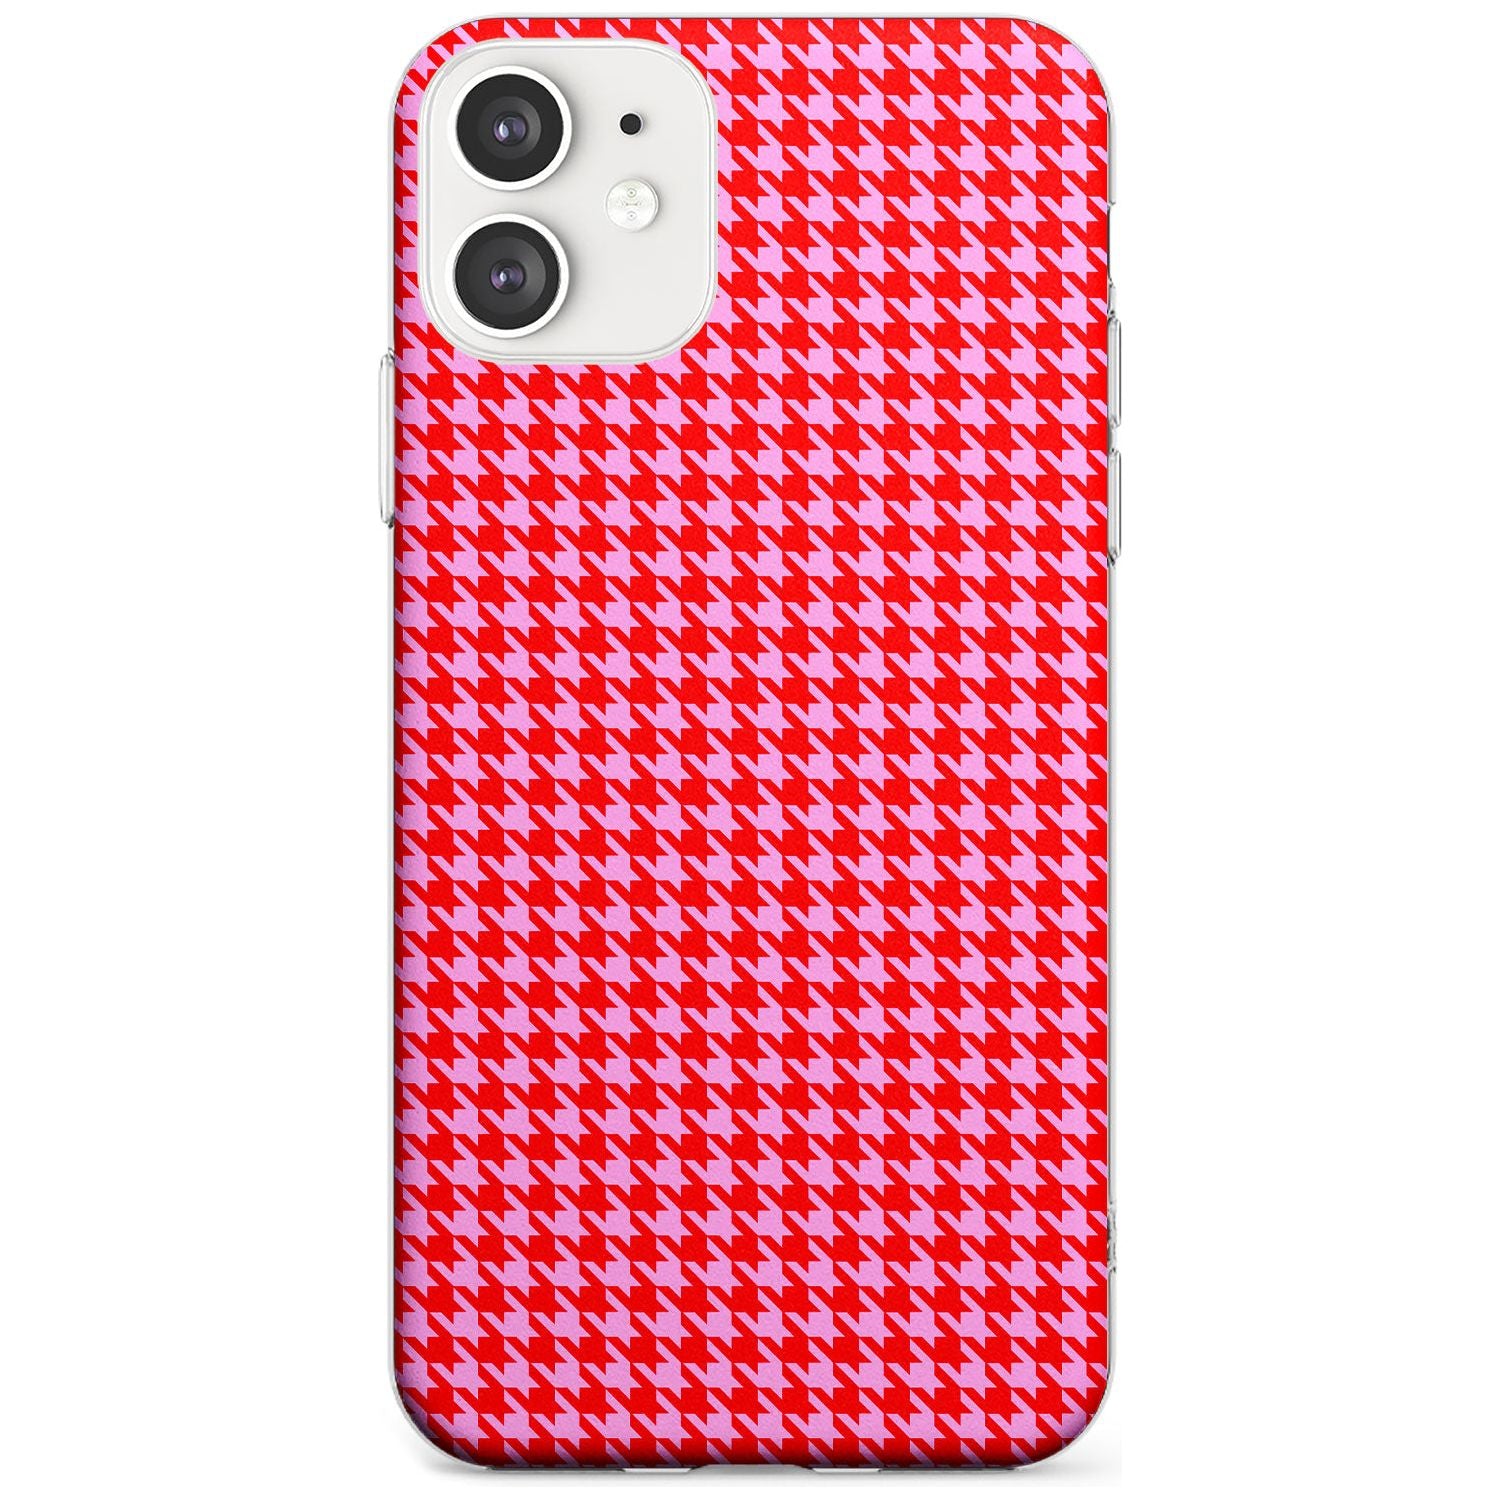 Neon Pink & Red Houndstooth Pattern Slim TPU Phone Case for iPhone 11